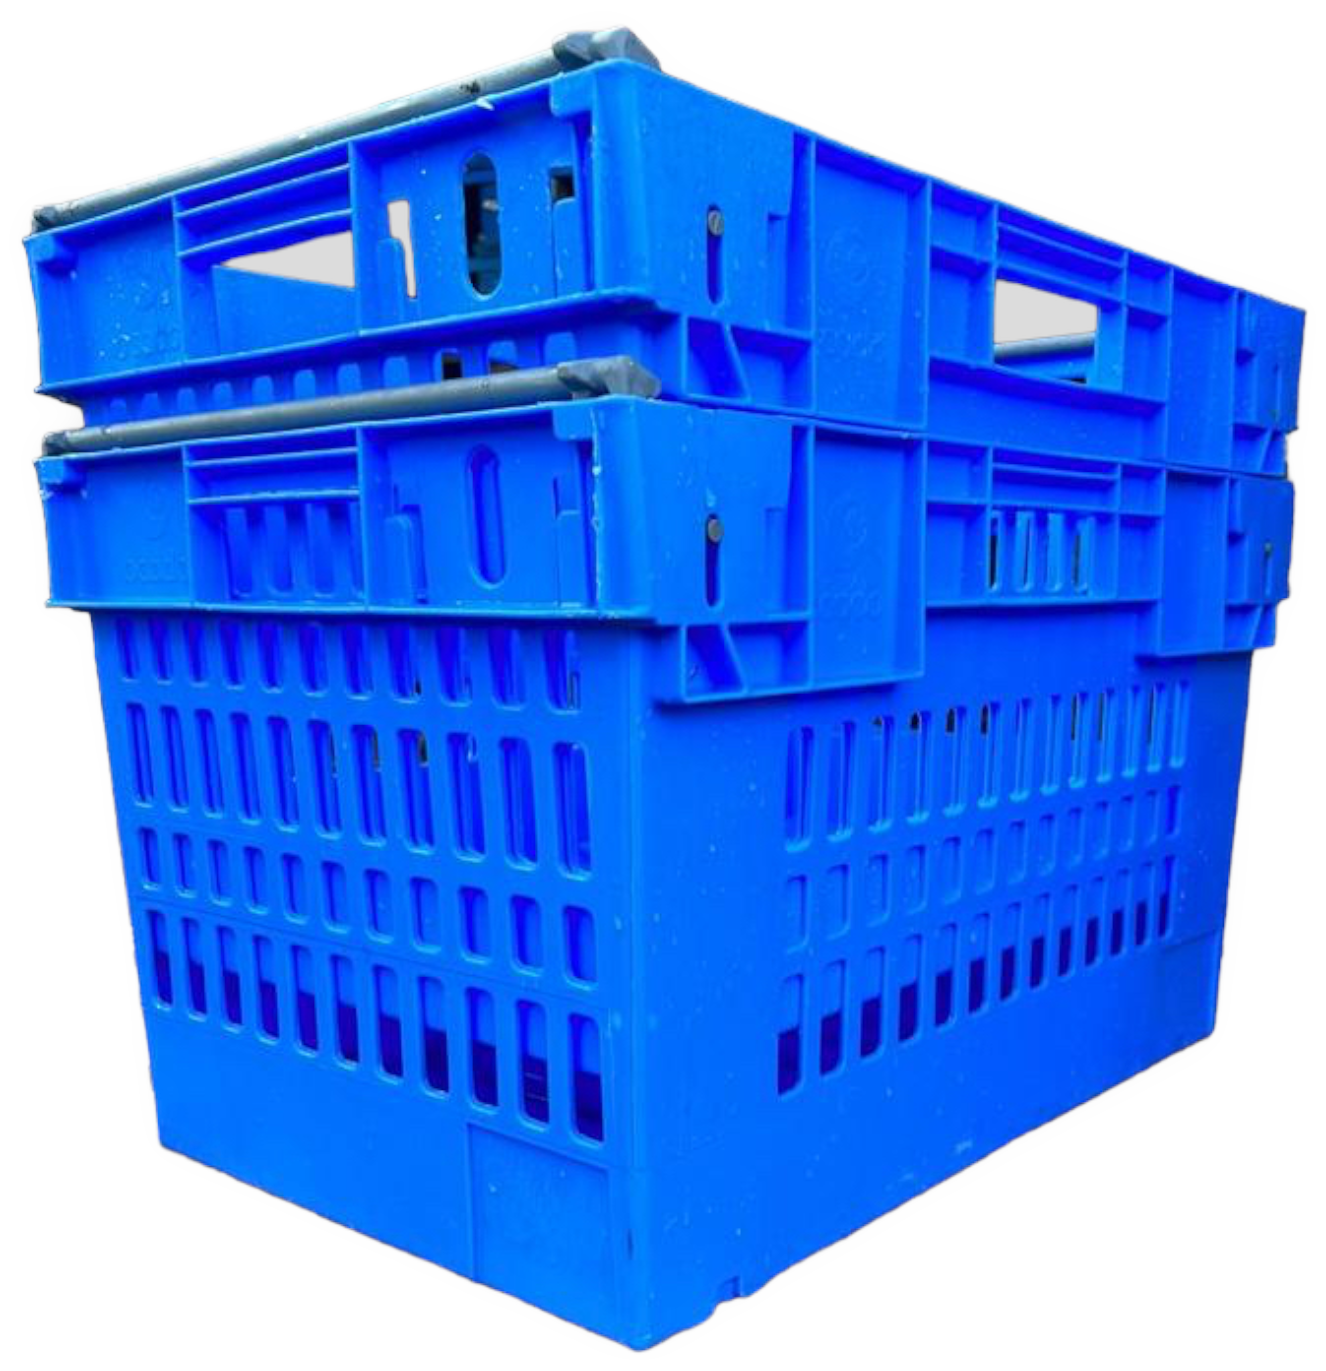 400x300x185 Bale Arm Crate Black 15LTR - Pack of 14 For The Retail Sector